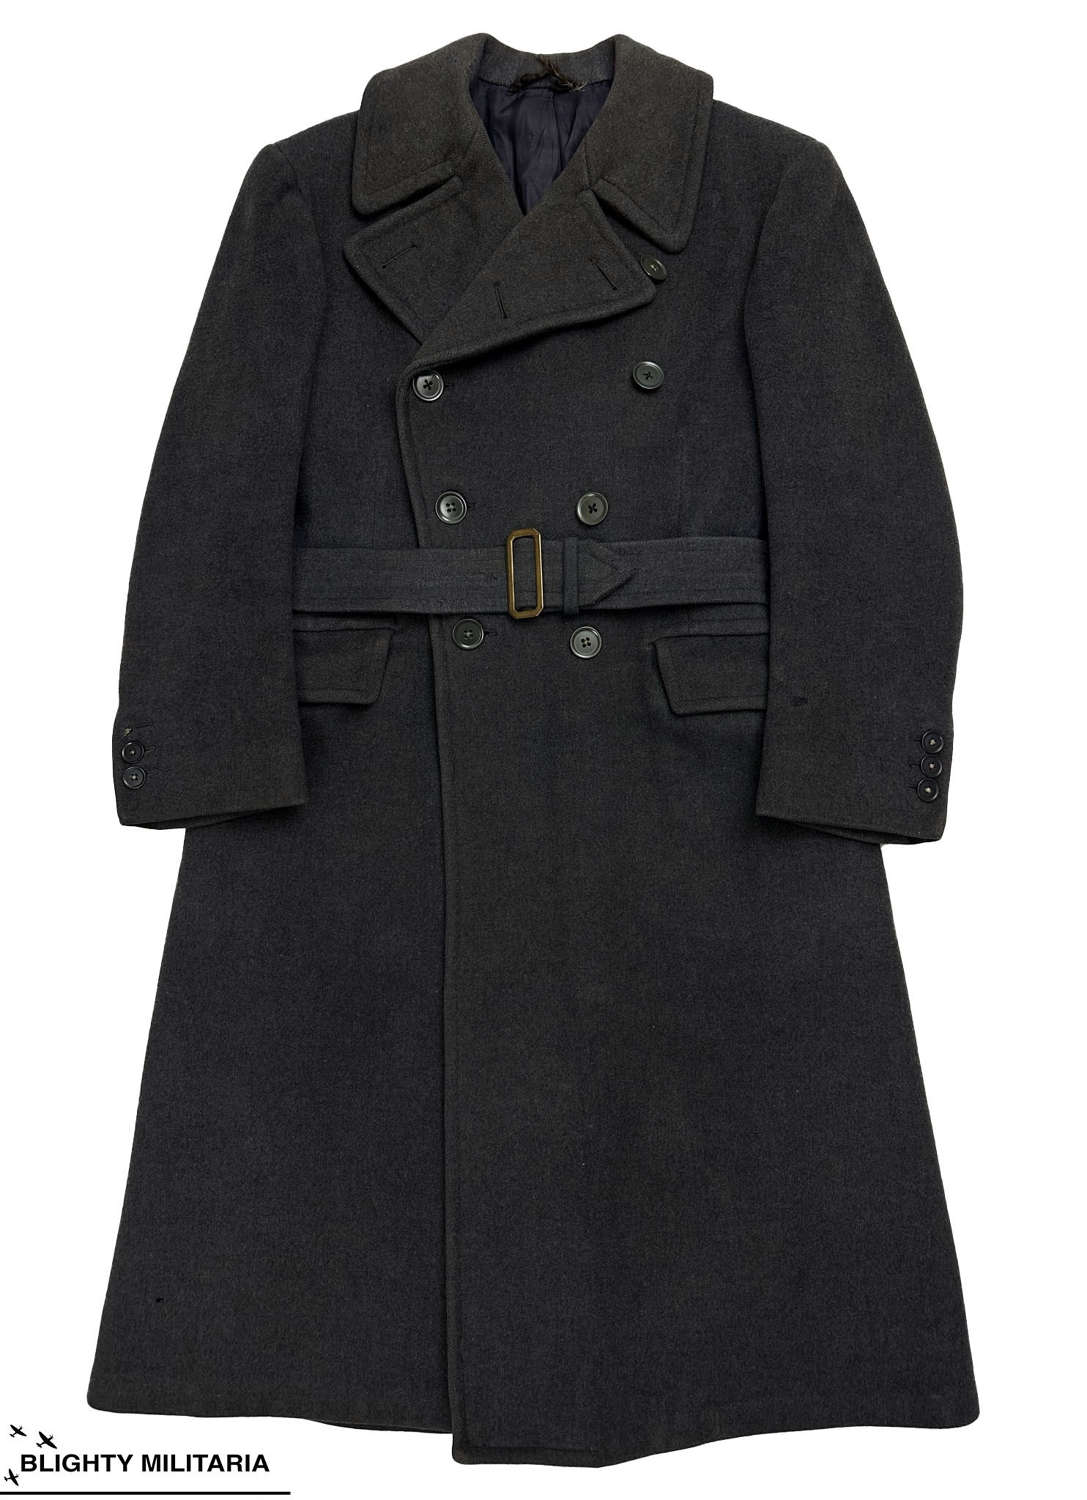 Original 1942 Dated RAF Officer's Greatcoat - Mosquito Pilot